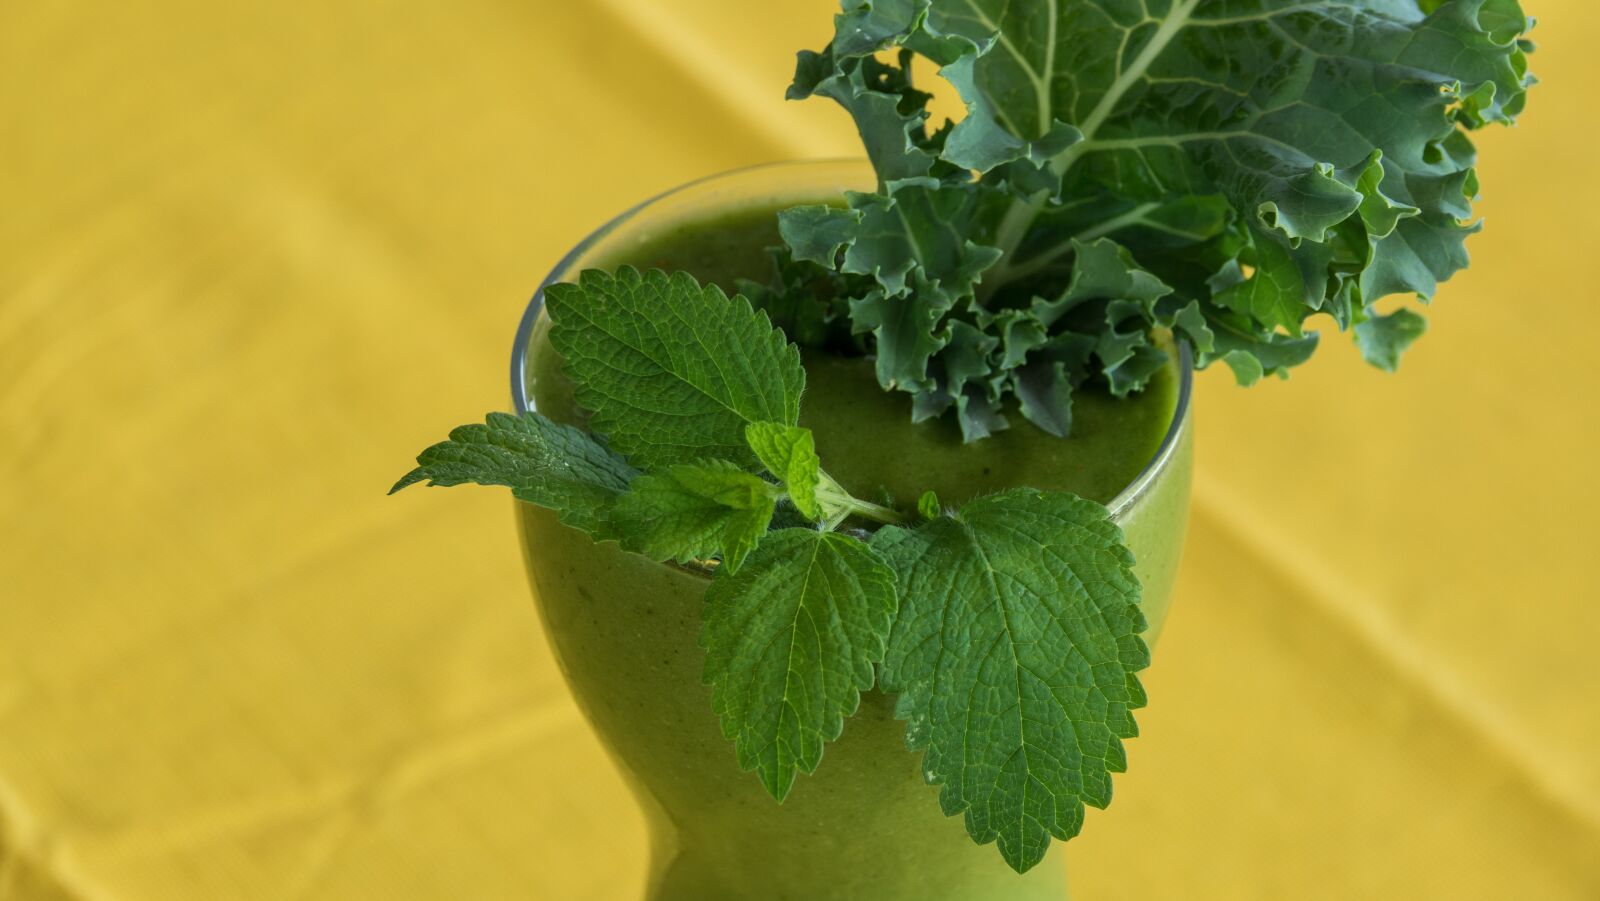 Sony Cyber-shot DSC-RX10 III sample photo. Green smoothie, smoothie, kale photography